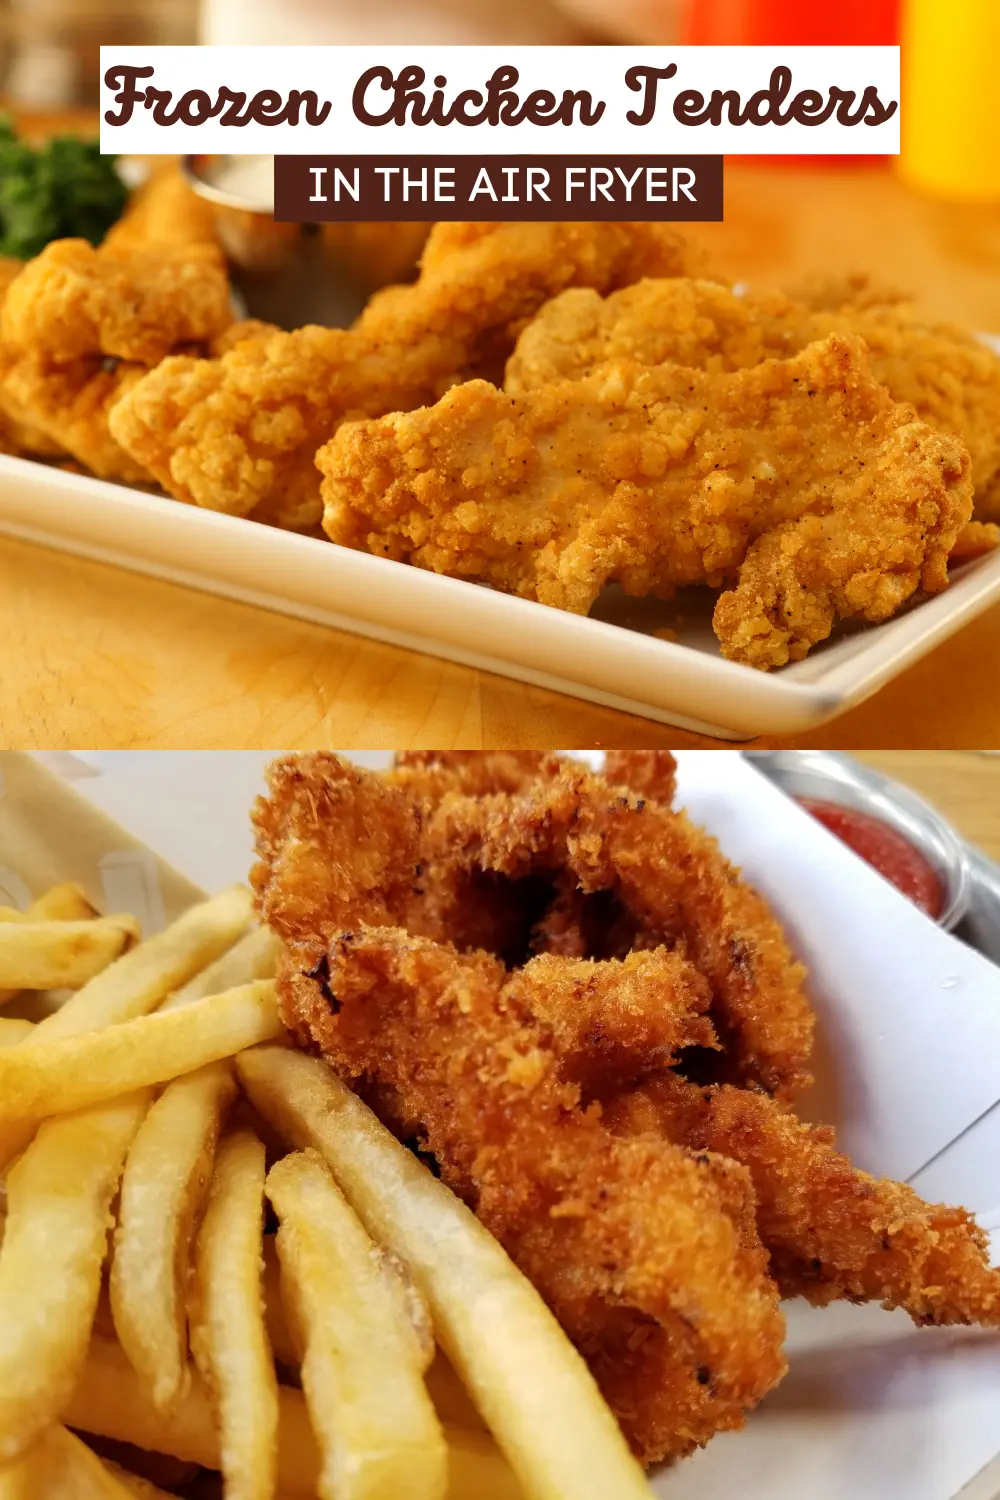 How To Make Frozen Chicken Tenders in The Air Fryer